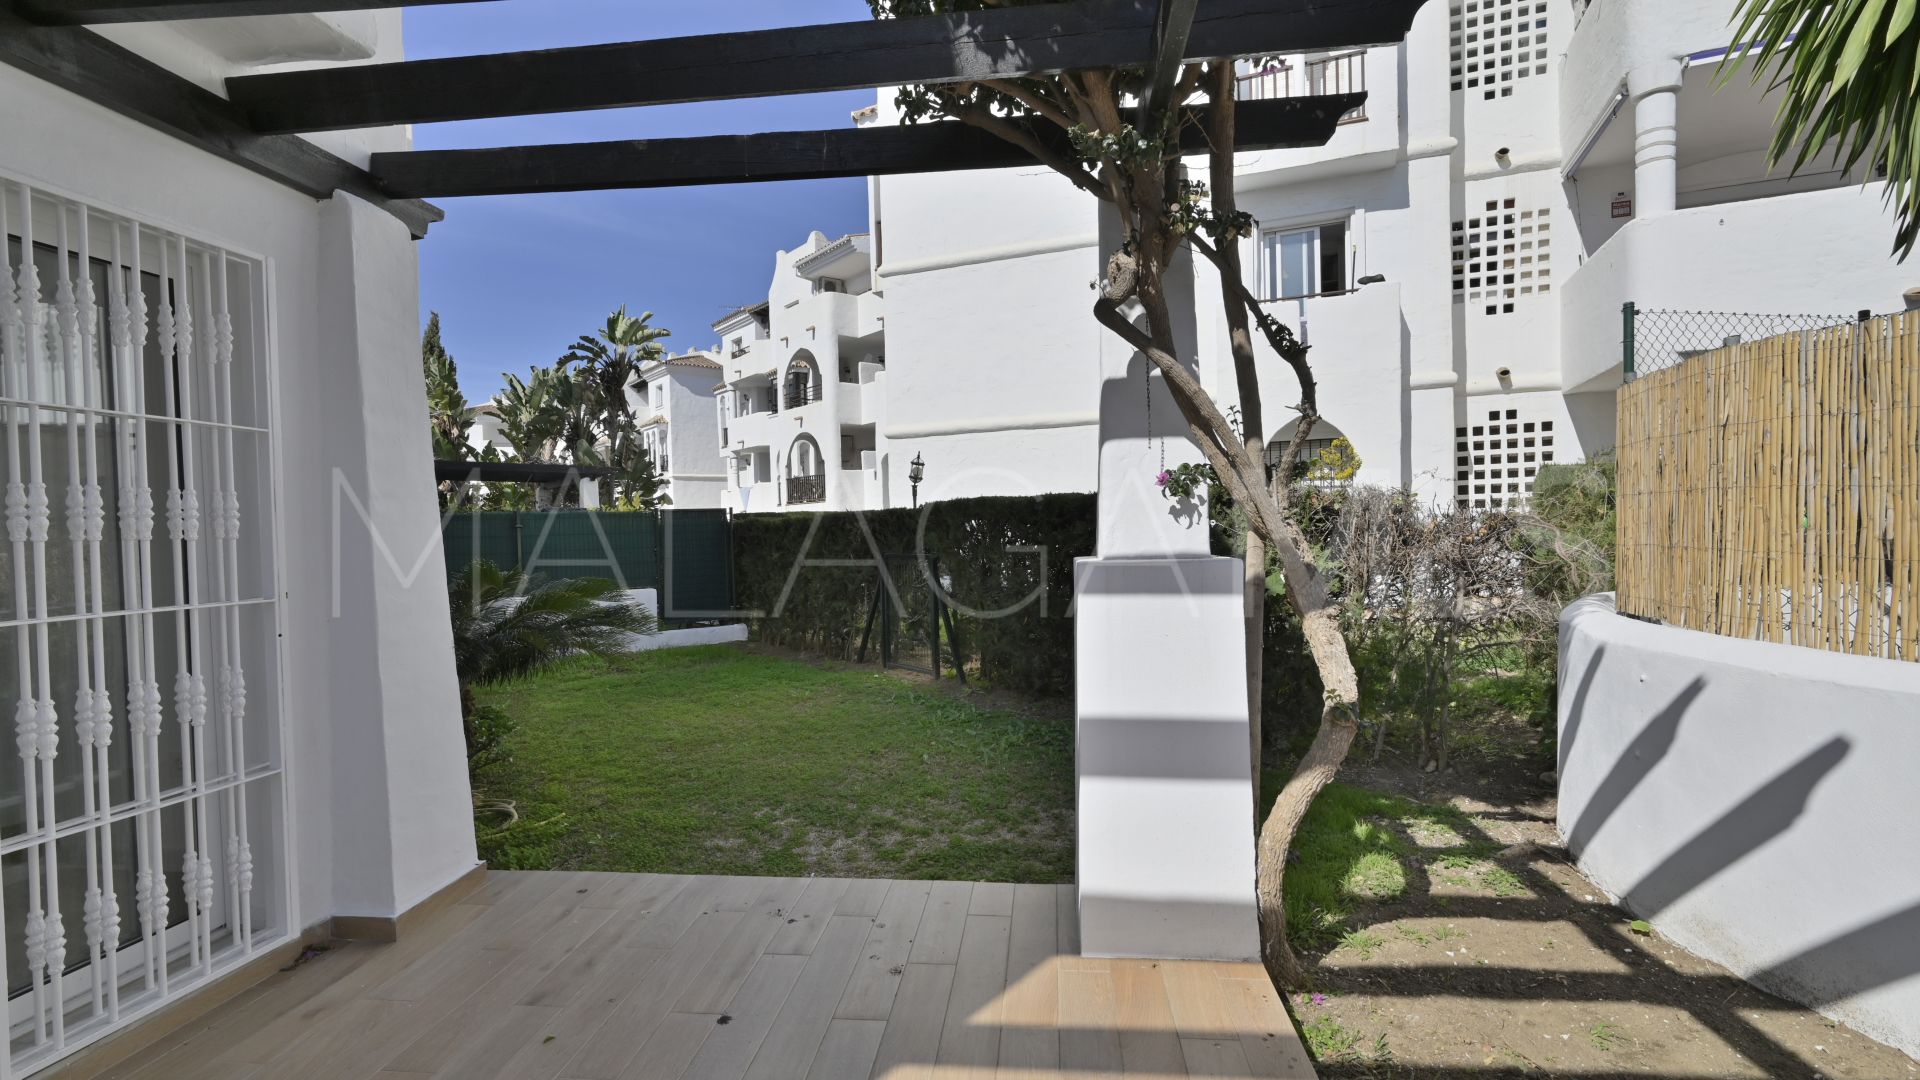 For sale ground floor apartment in Calahonda with 2 bedrooms